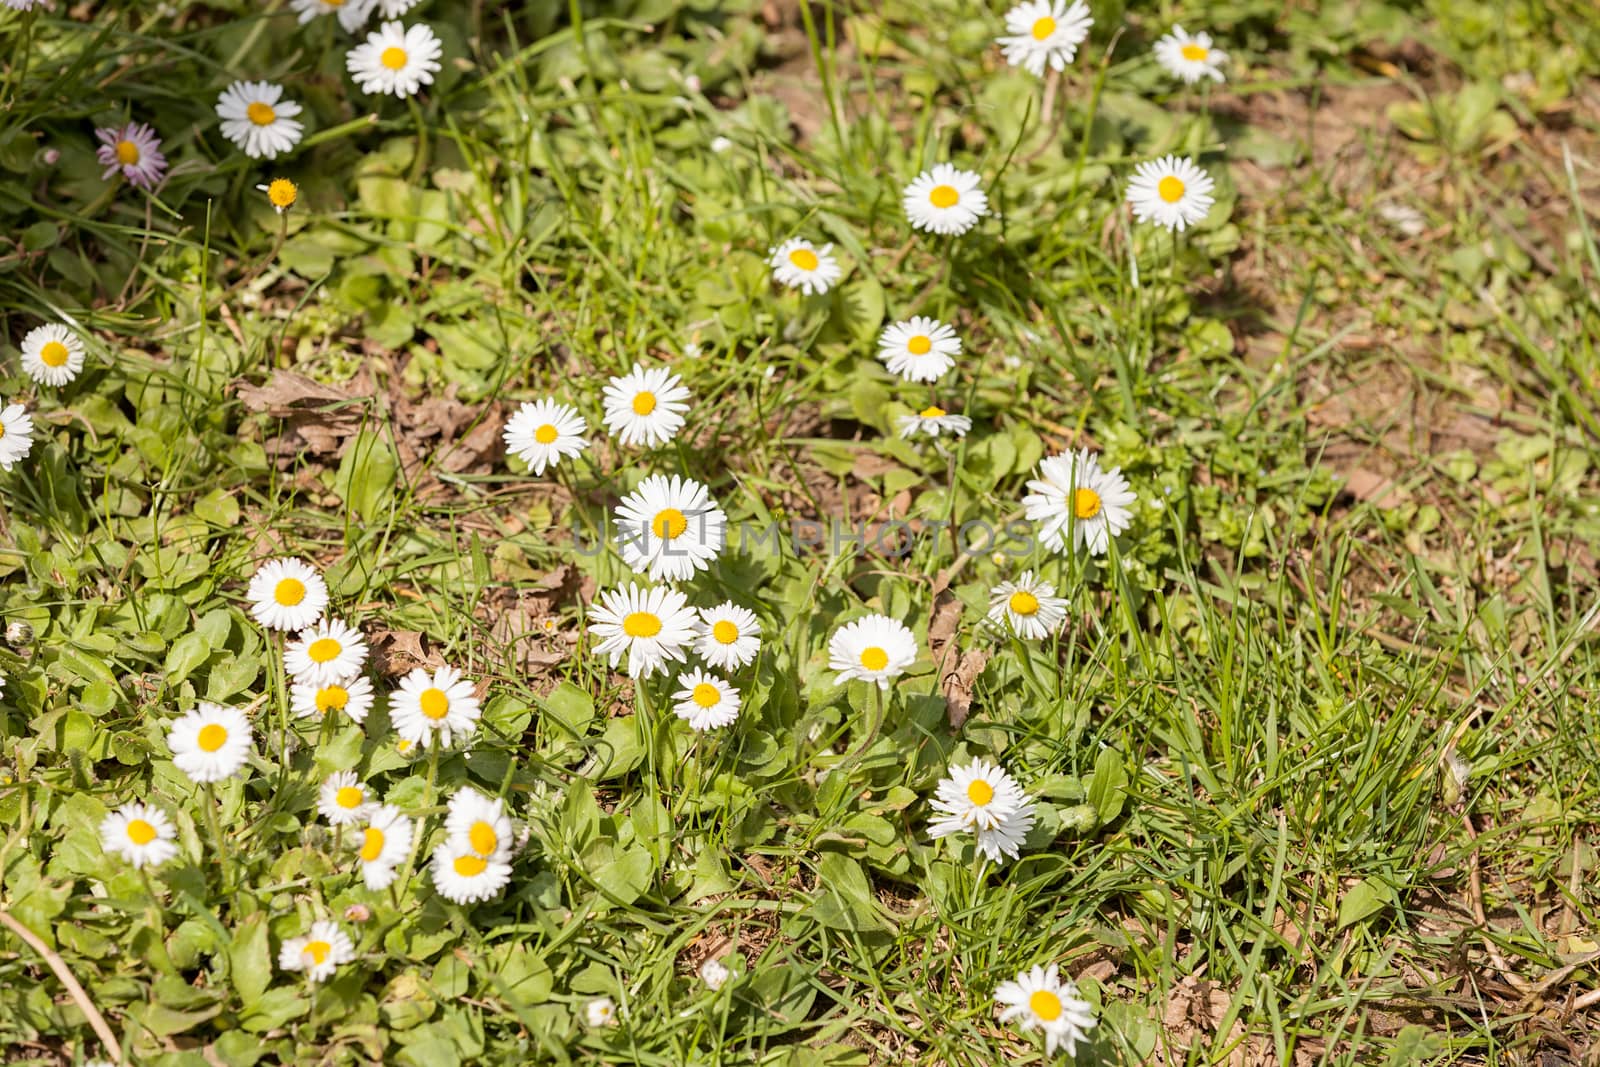 flowers daisies on the grass, note shallow depth of field